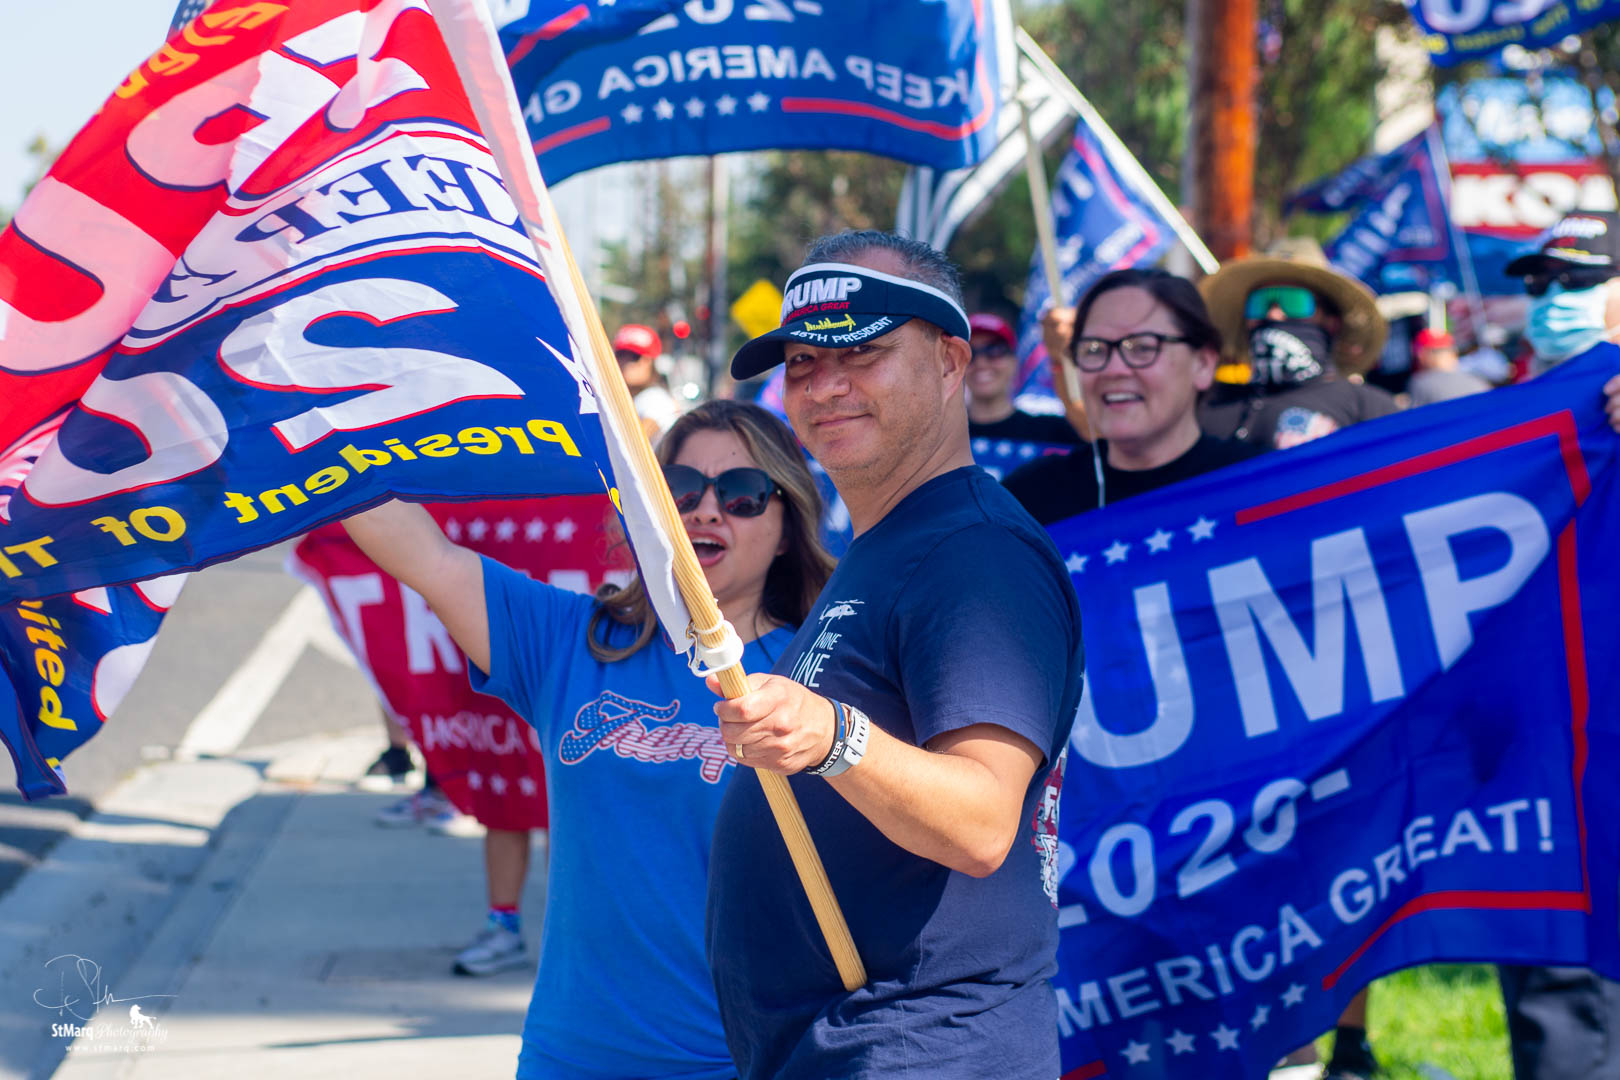 Bill Thomas, center, holding flag, and his wife, center, left, attend a Rally in support of President Trump on Sunday, October 18, 2020 in La Habra, CA.